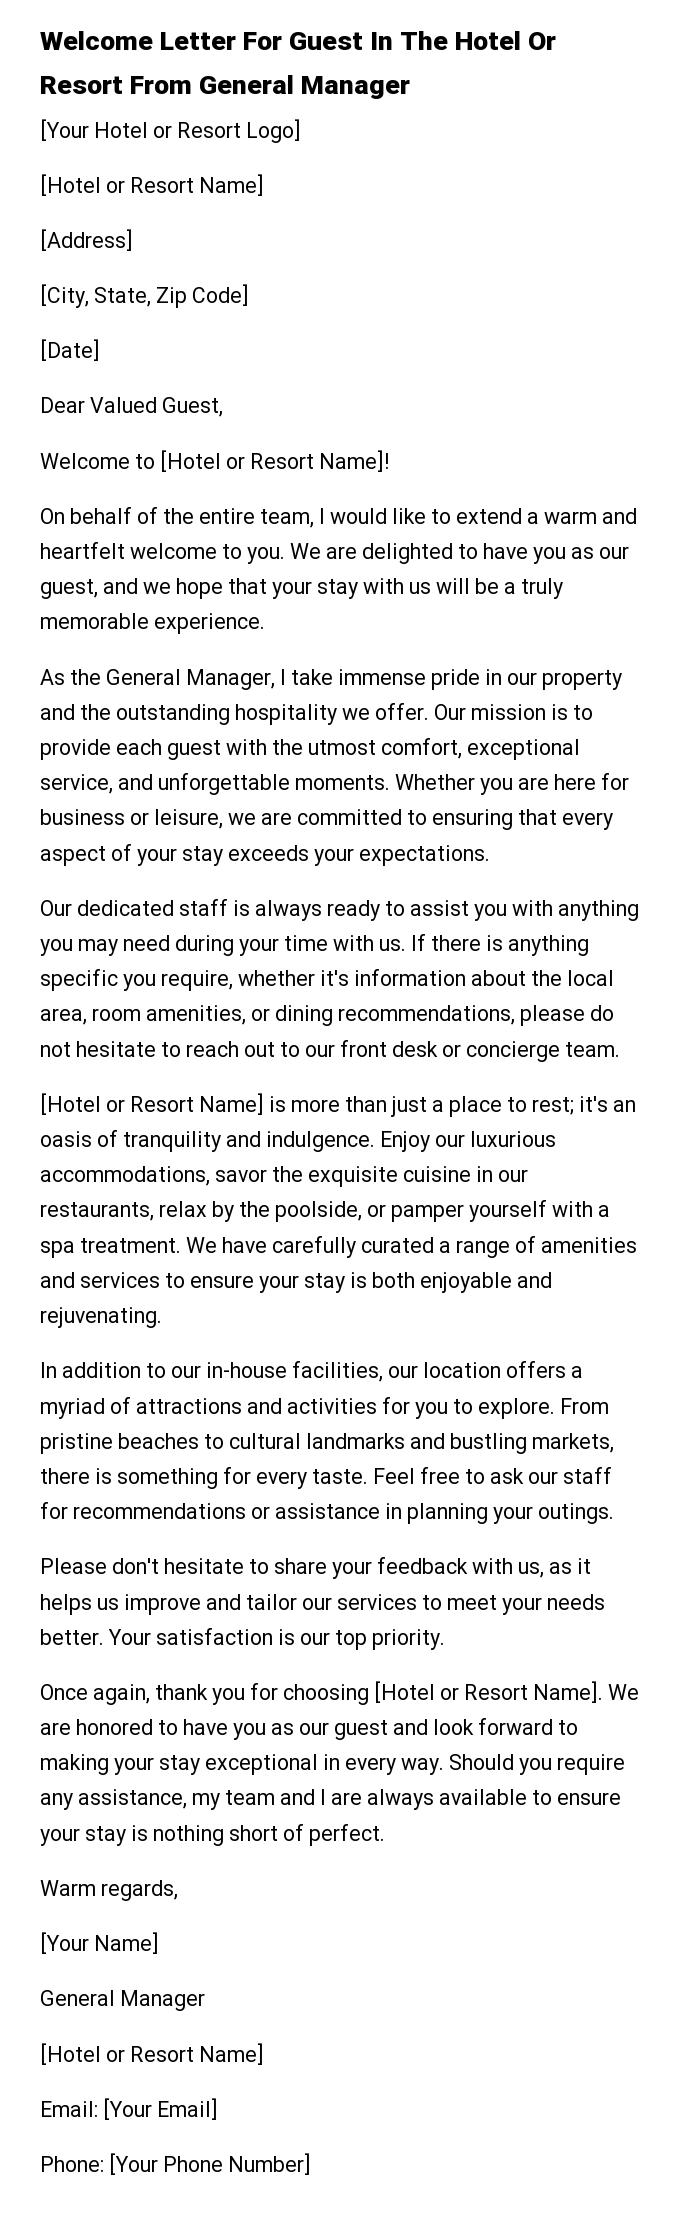 Welcome Letter For Guest In The Hotel Or Resort From General Manager